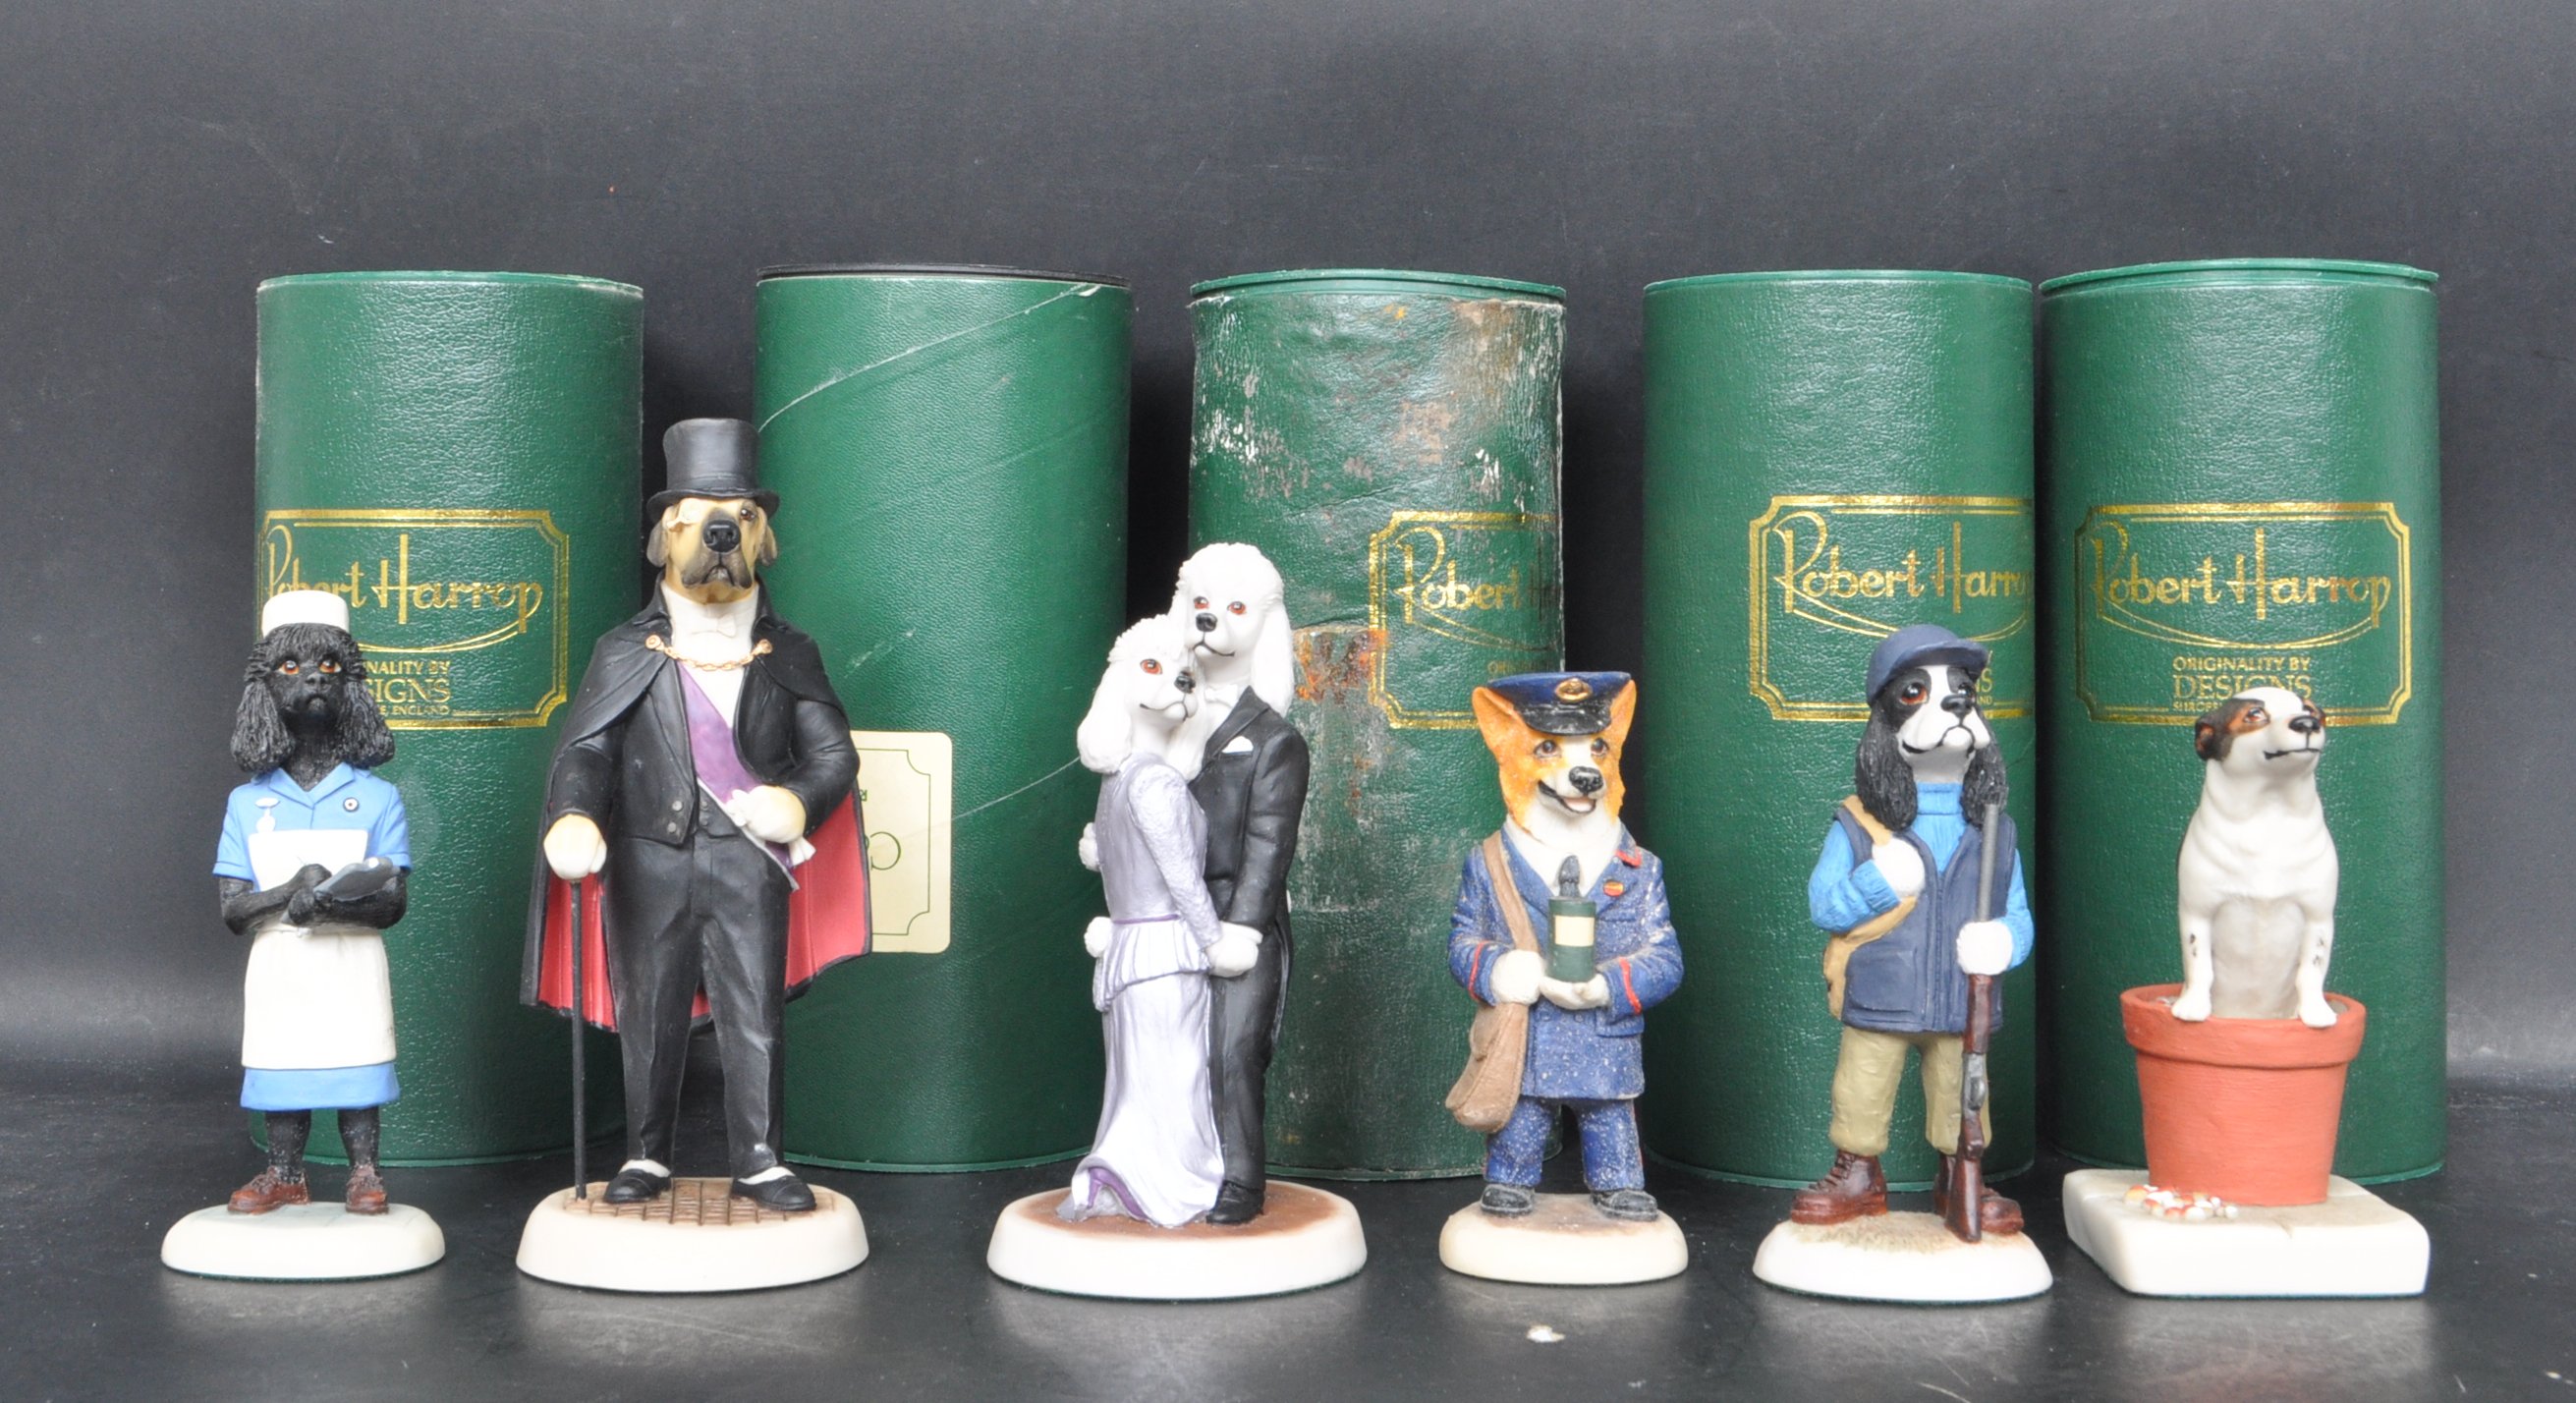 COLLECTION OF ROBERT HARROP COUNTRY COMPANION FIGURINES